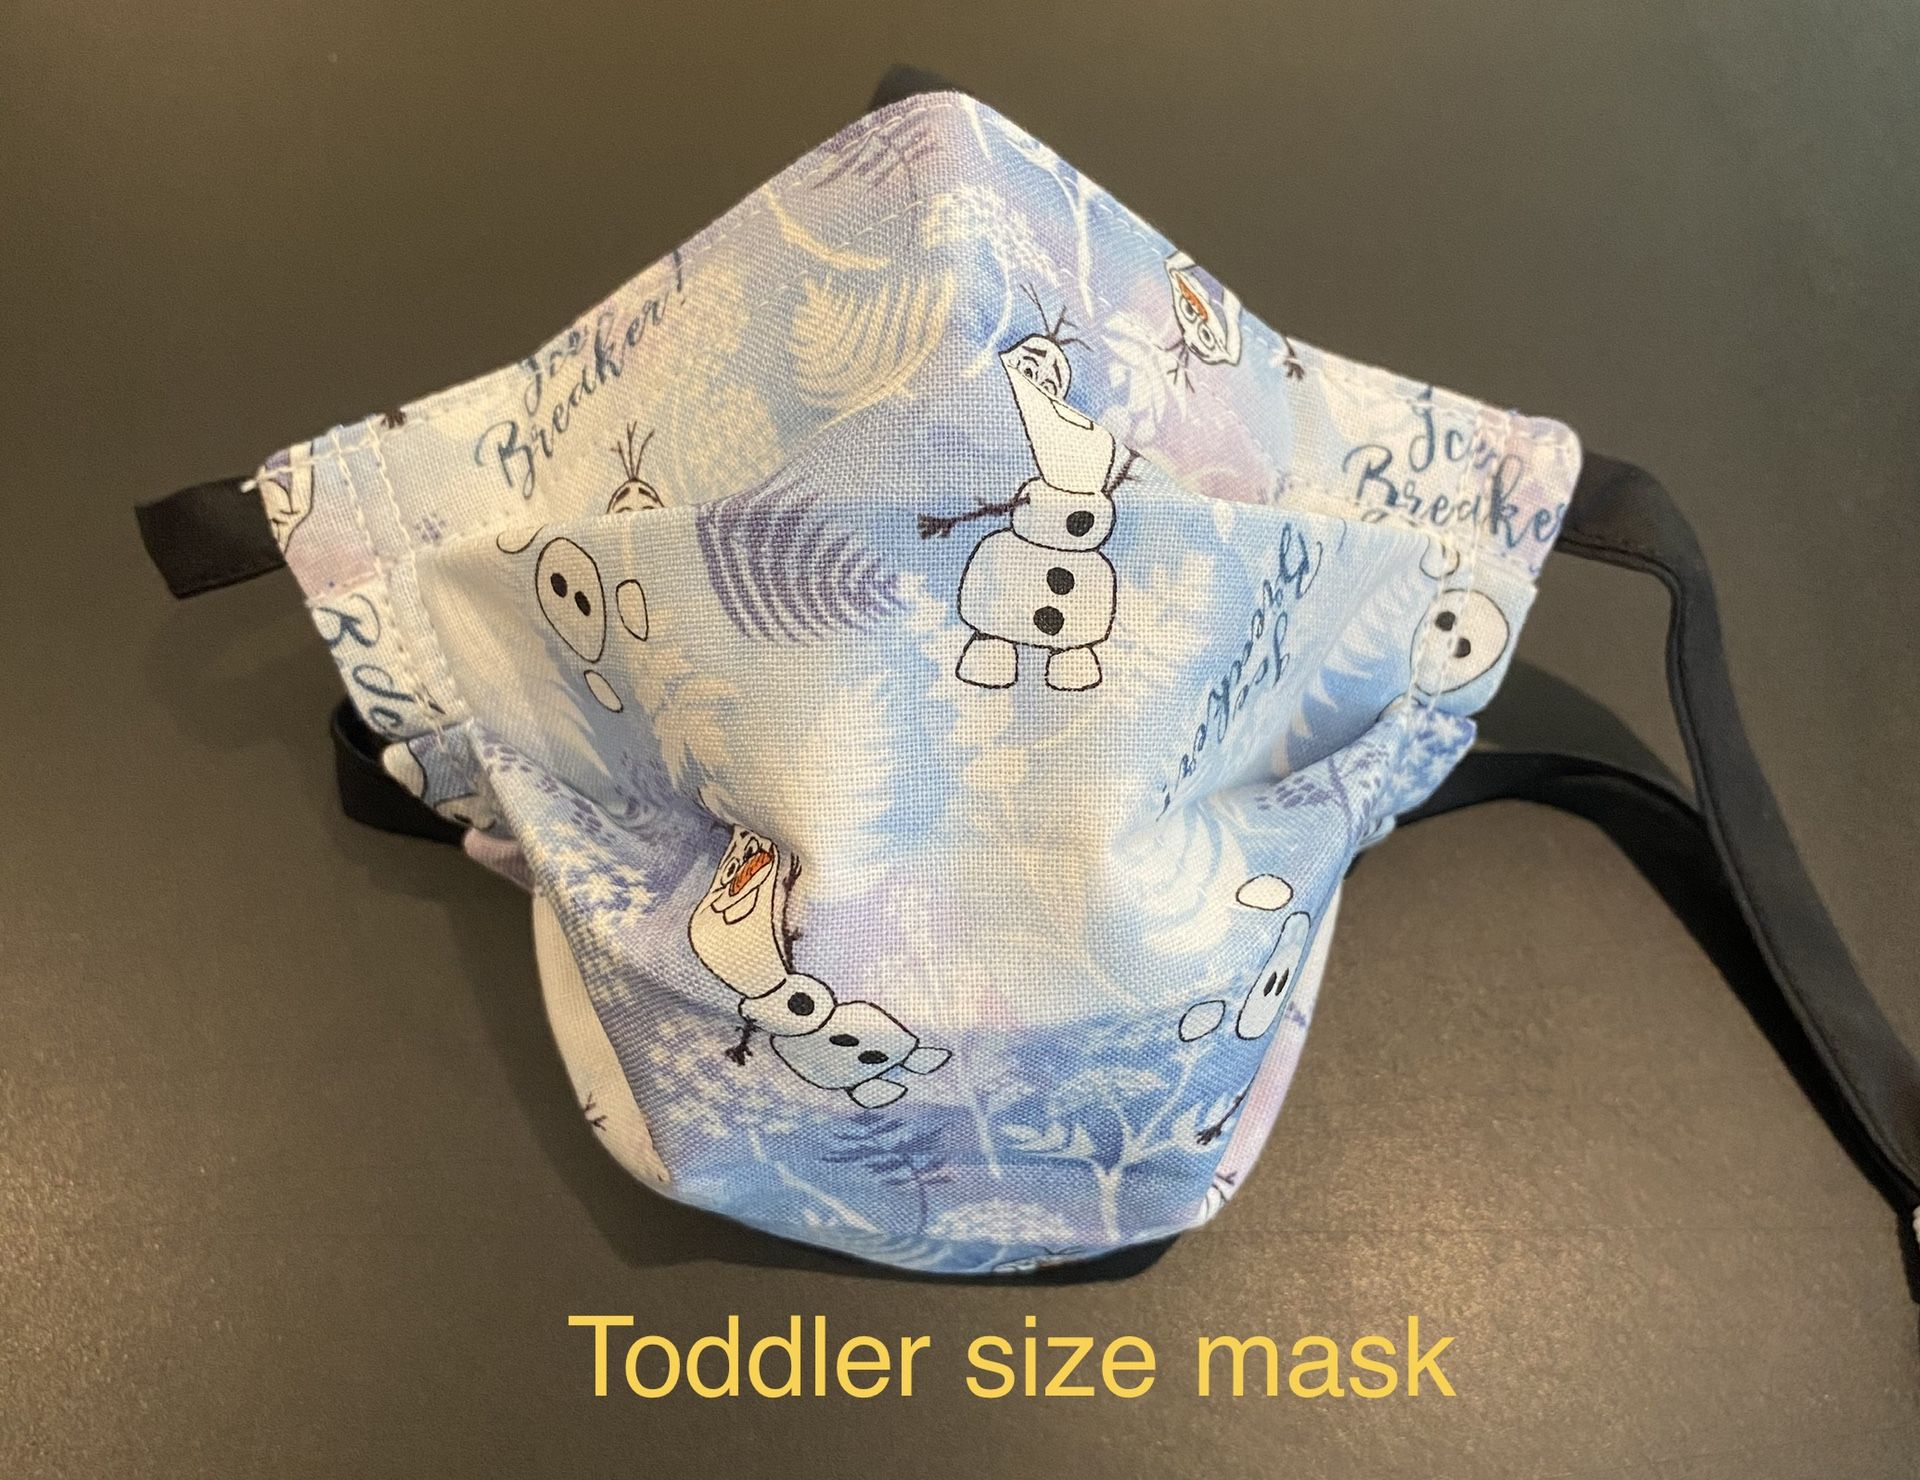 Handmade Disney Frozen Olaf Toddler face mask fits 2 to 3 years old with Adjustable ear straps and nose wire